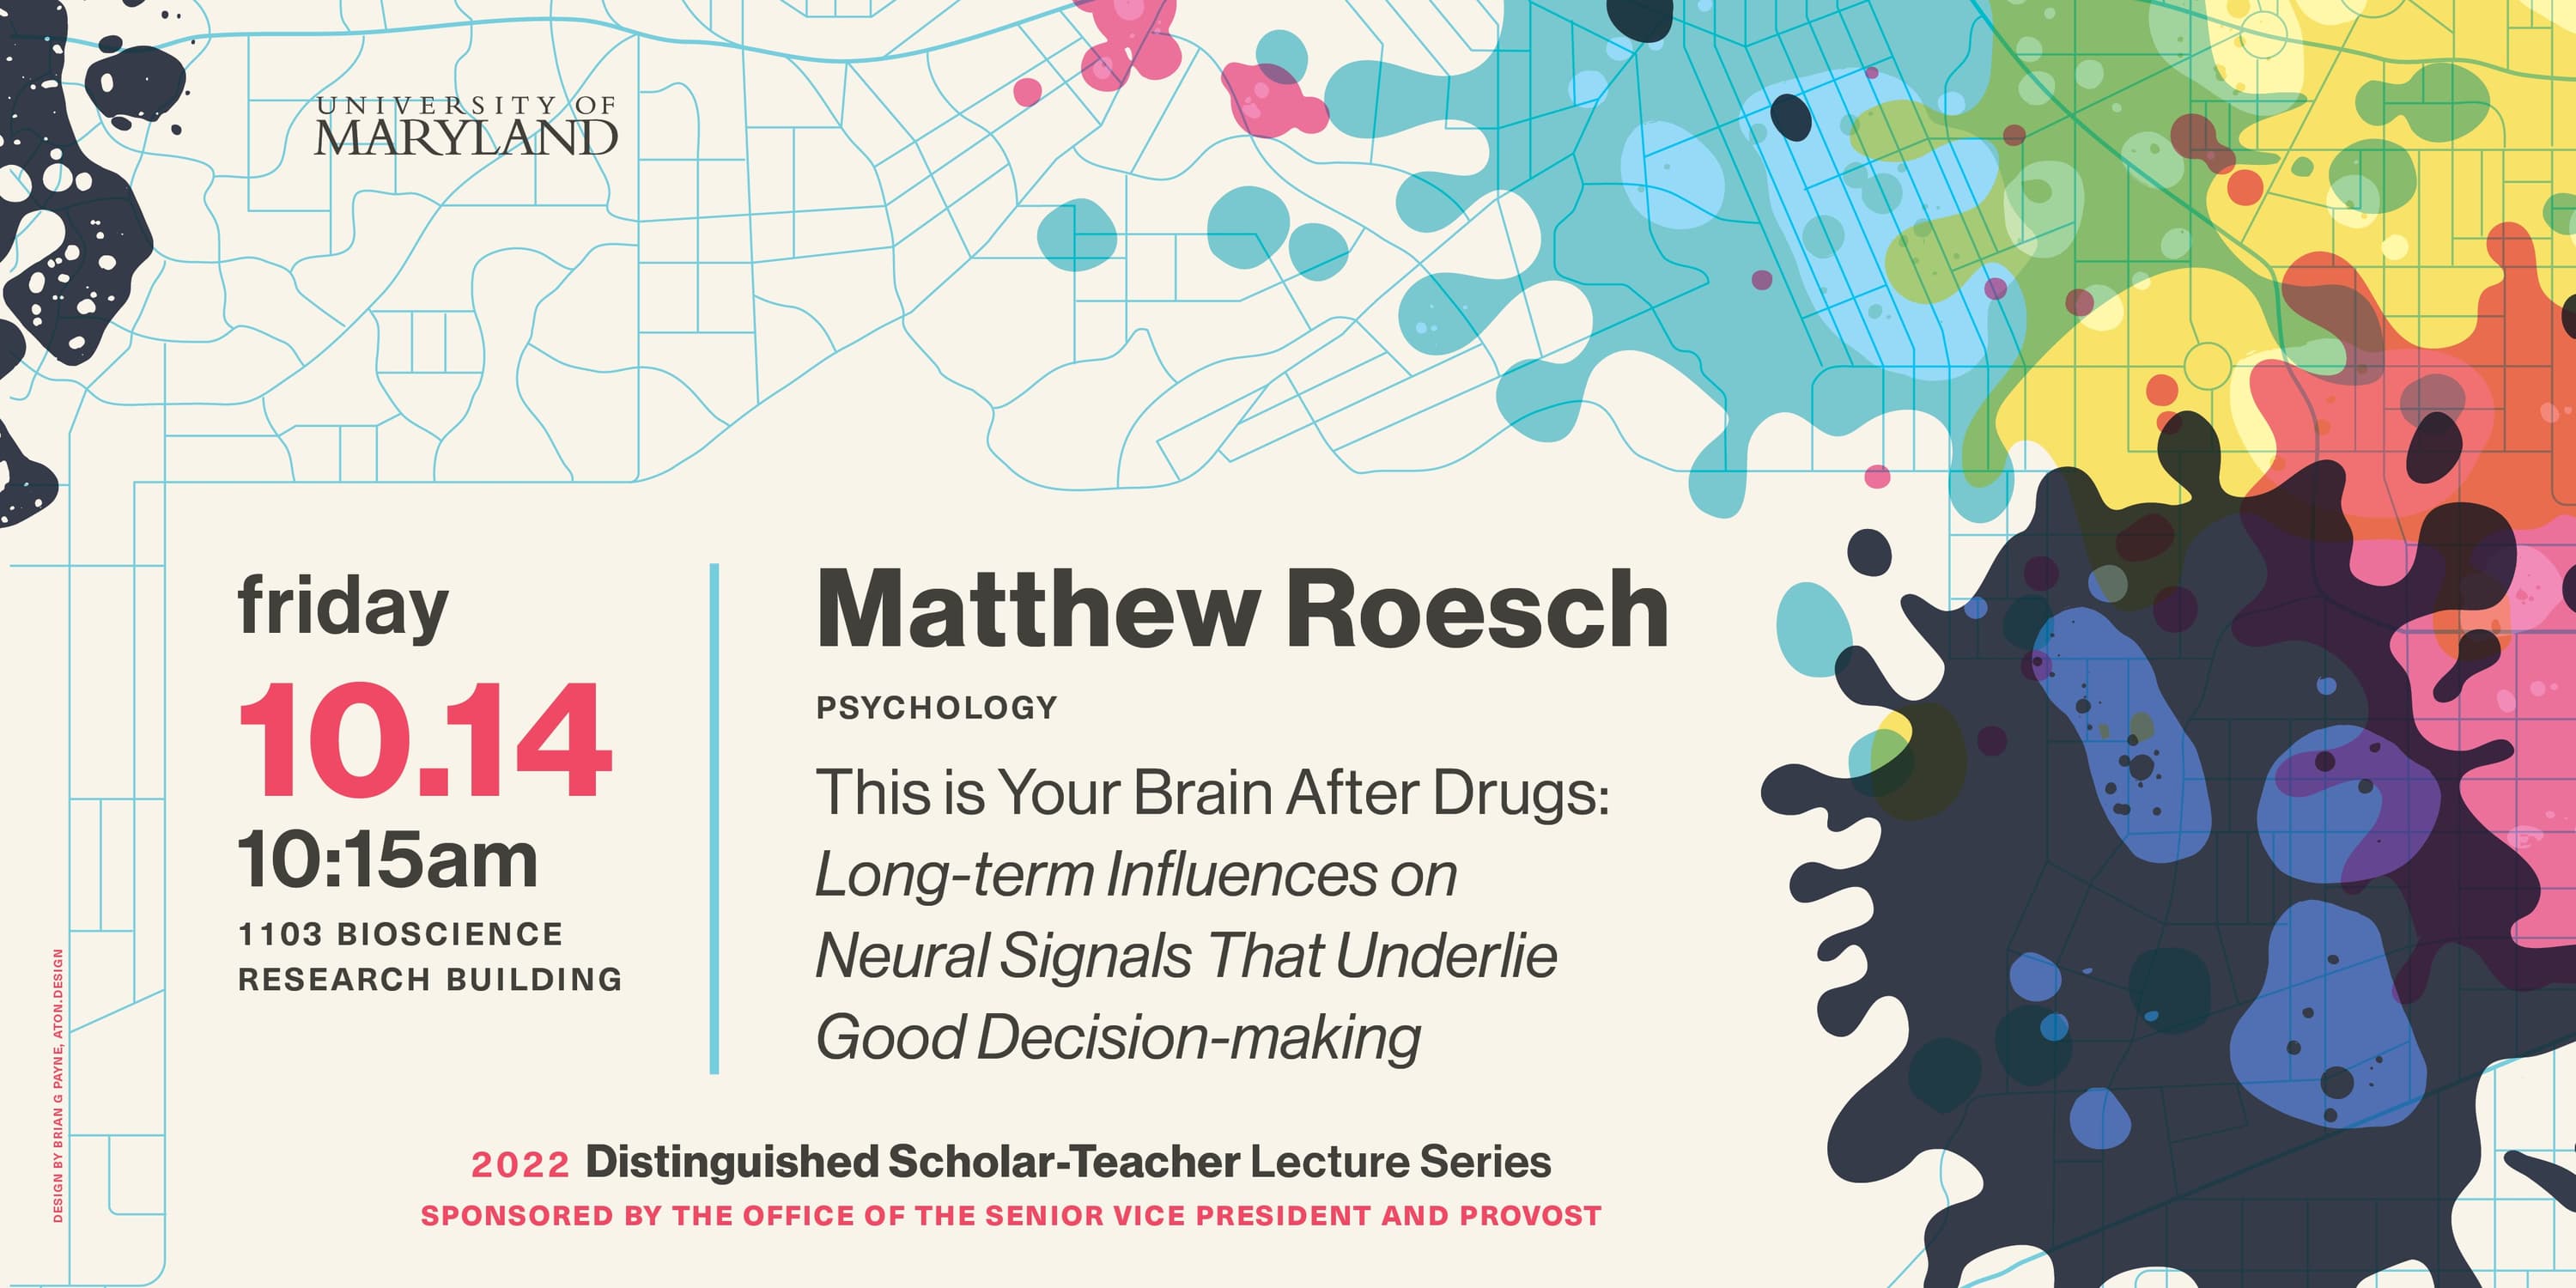 2022 DST Lecture Series Poster Image - Matthew Roesch